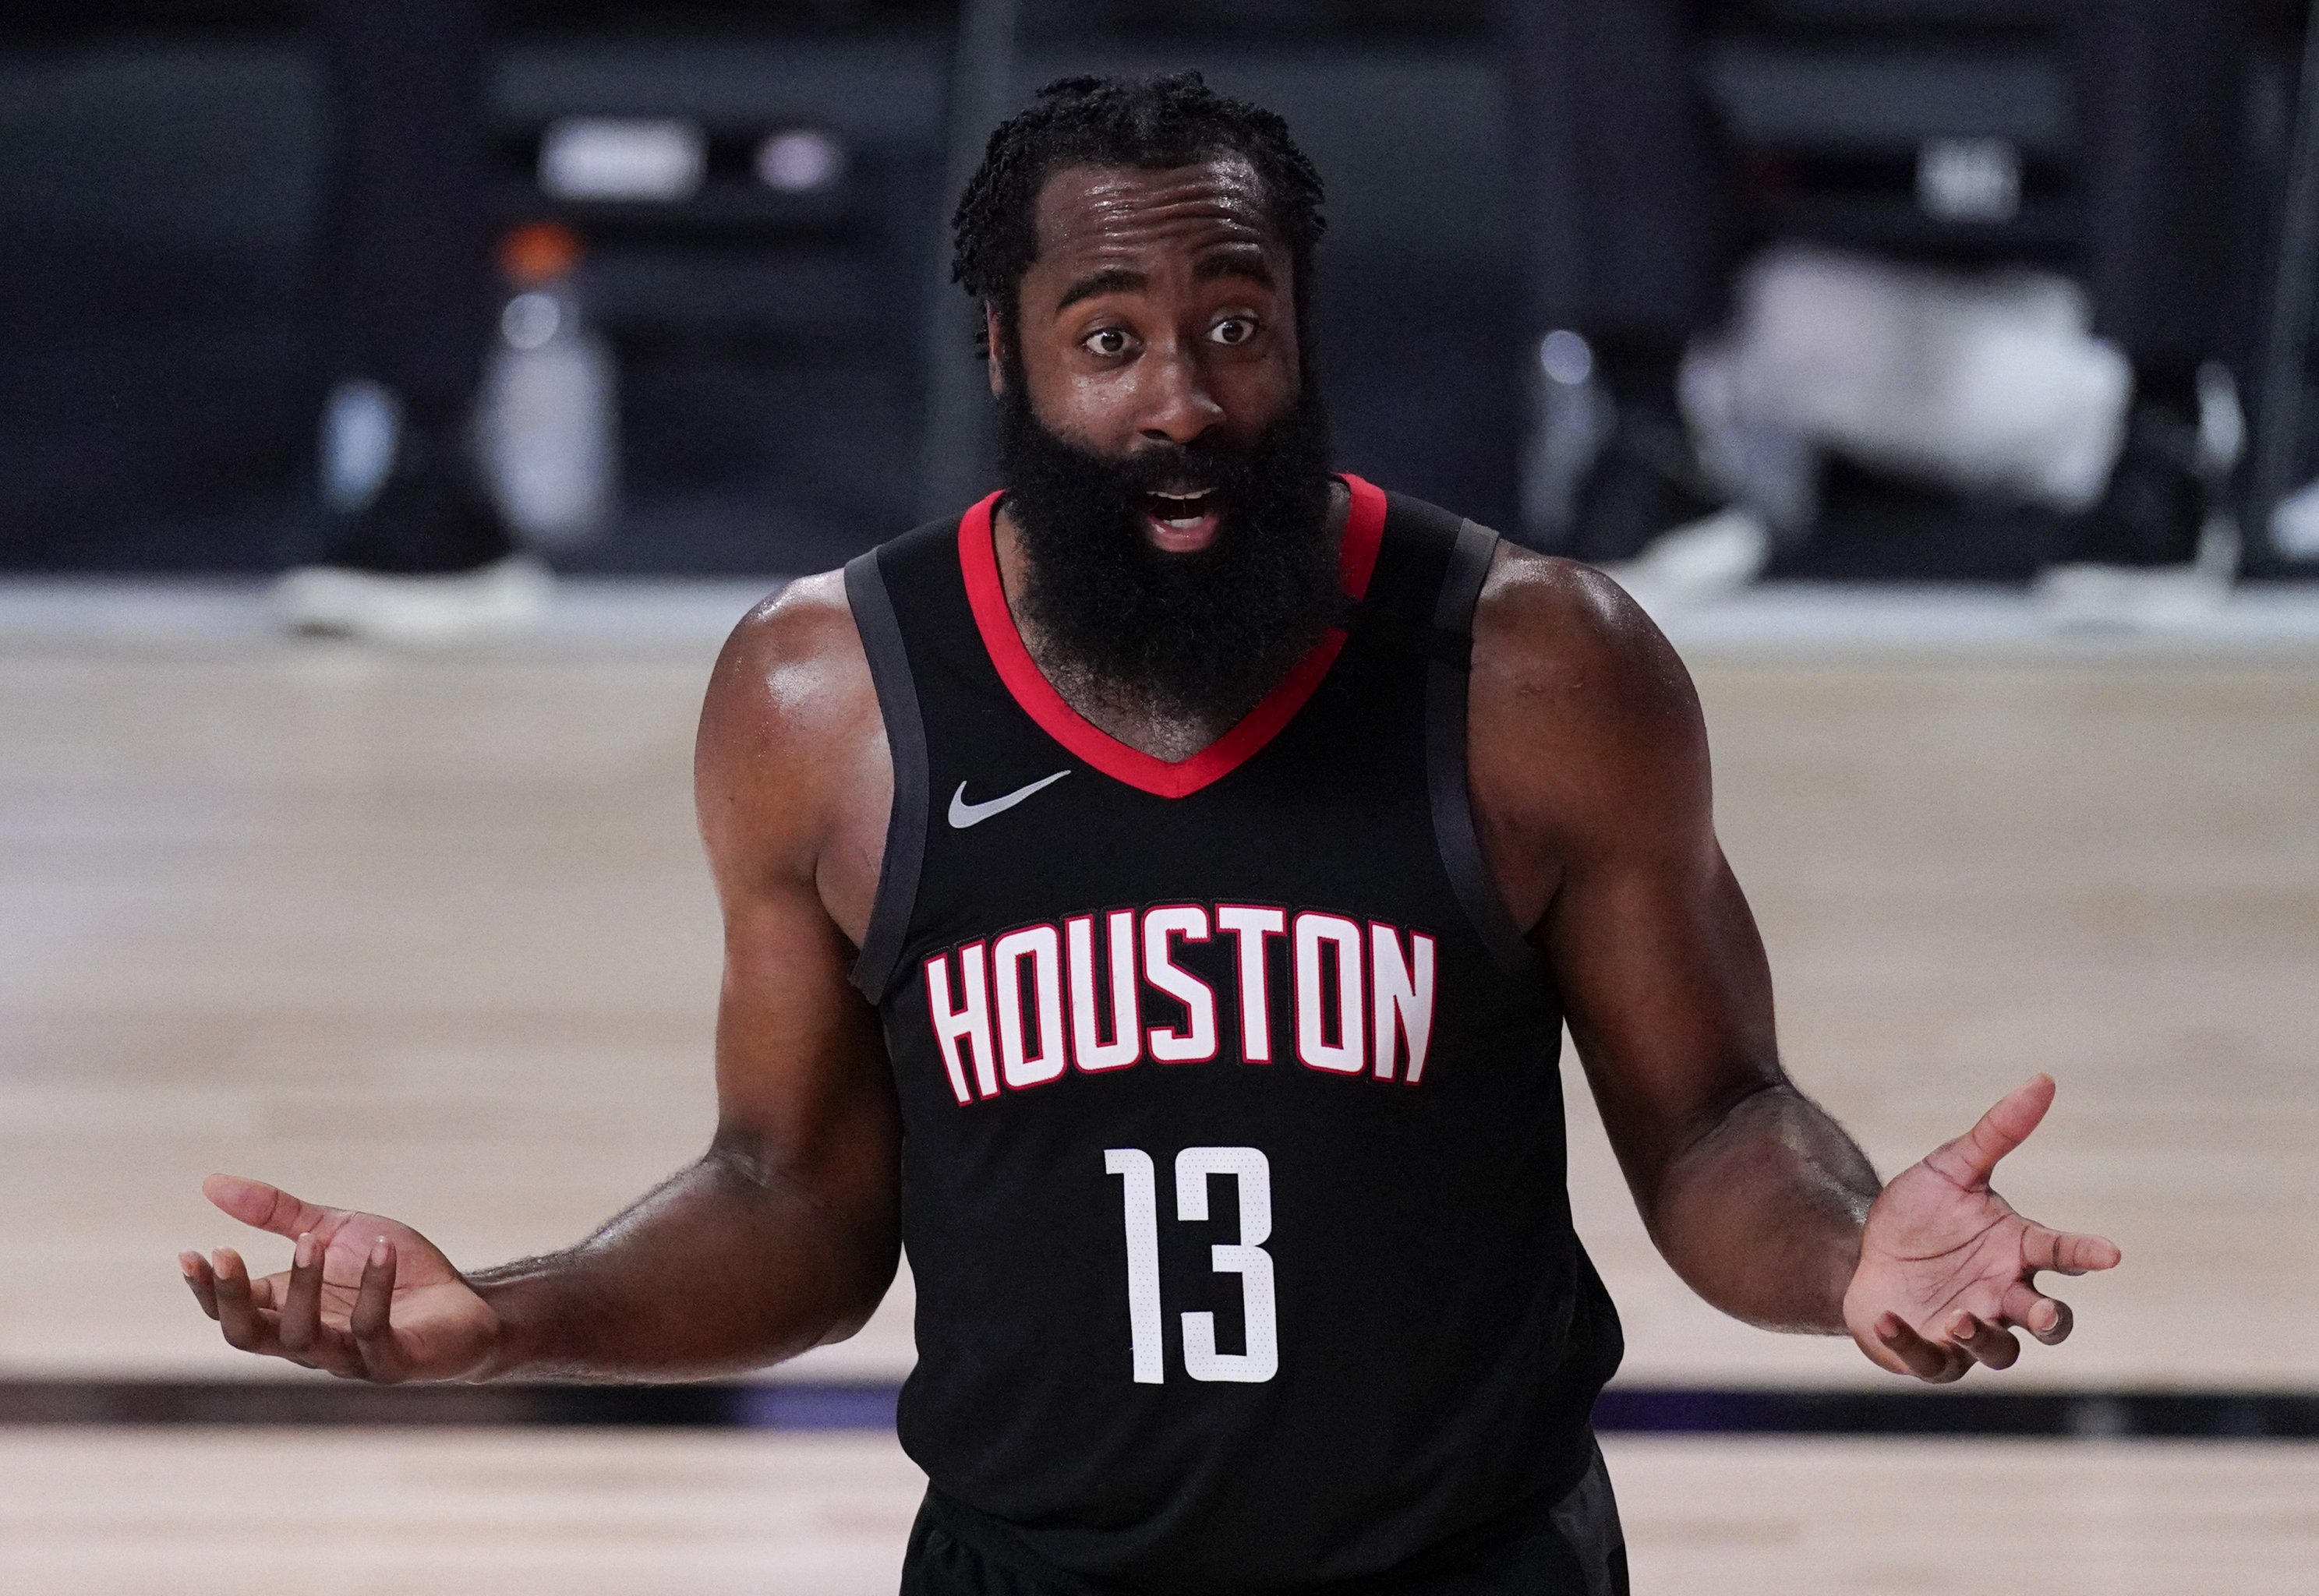 B/R predicts James Harden to re-sign with Sixers in the offseason